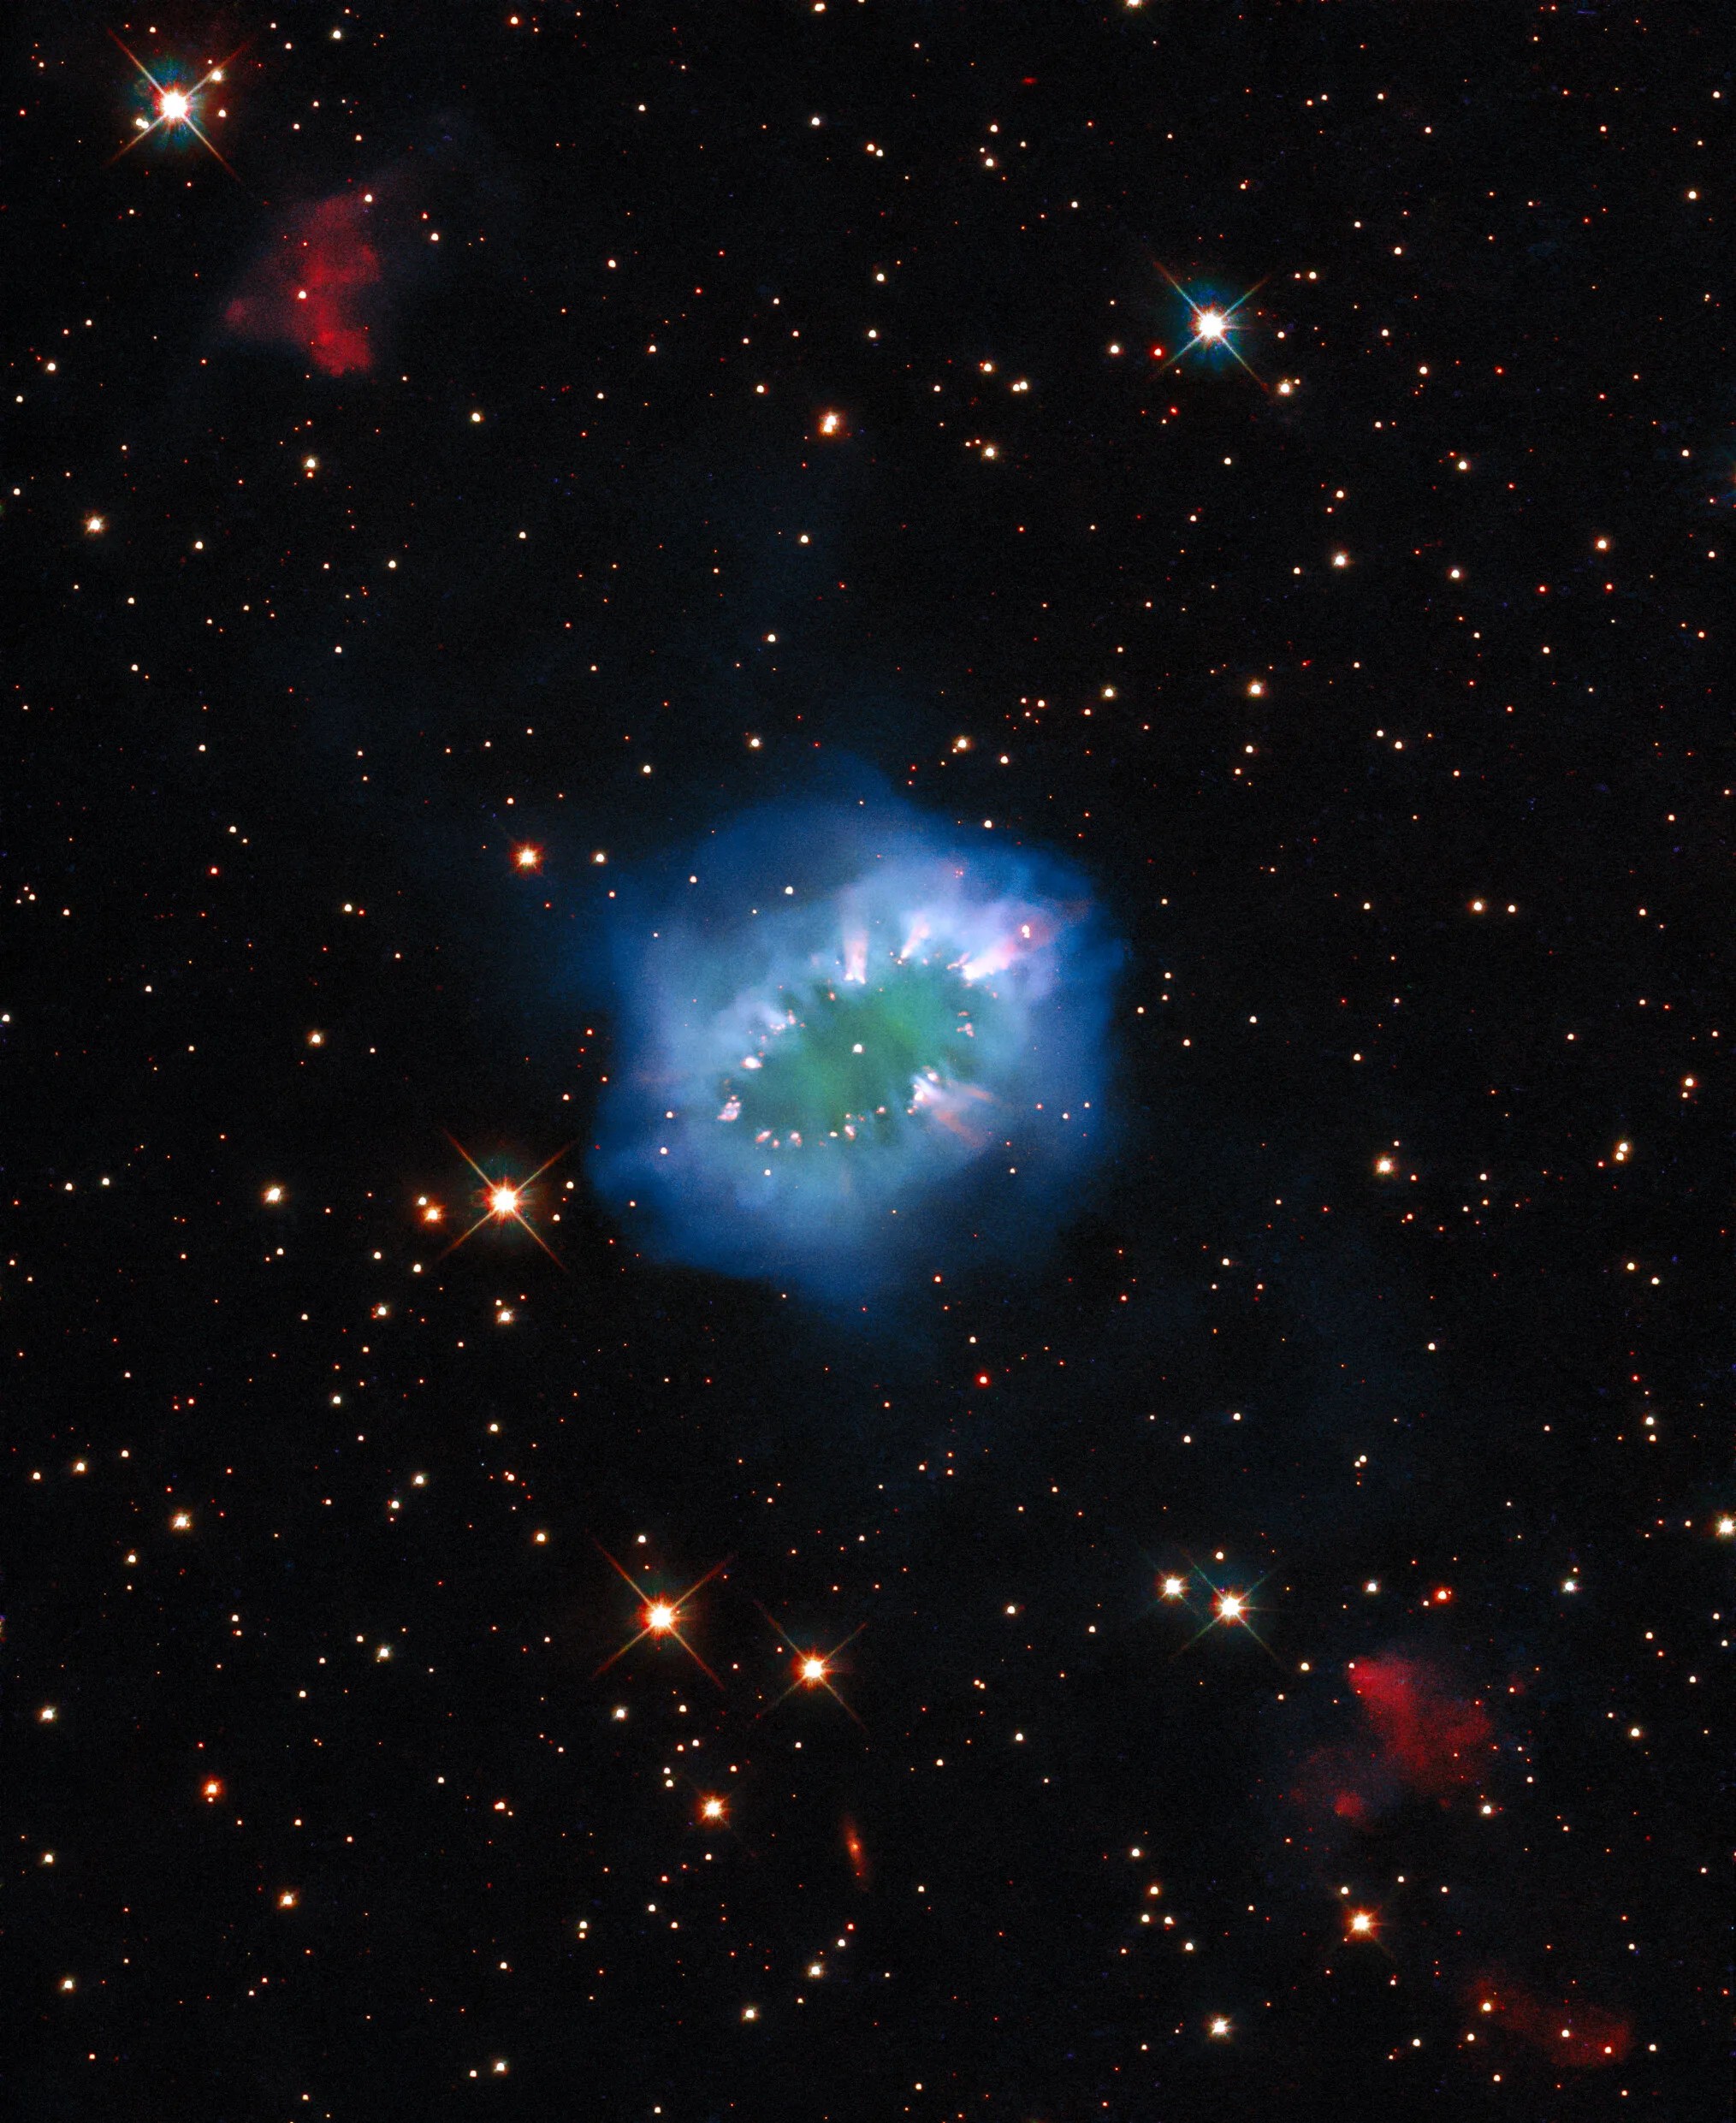 The interaction of two doomed stars has created this spectacular ring adorned with bright clumps of gas ¬– a diamond necklace of cosmic proportions.